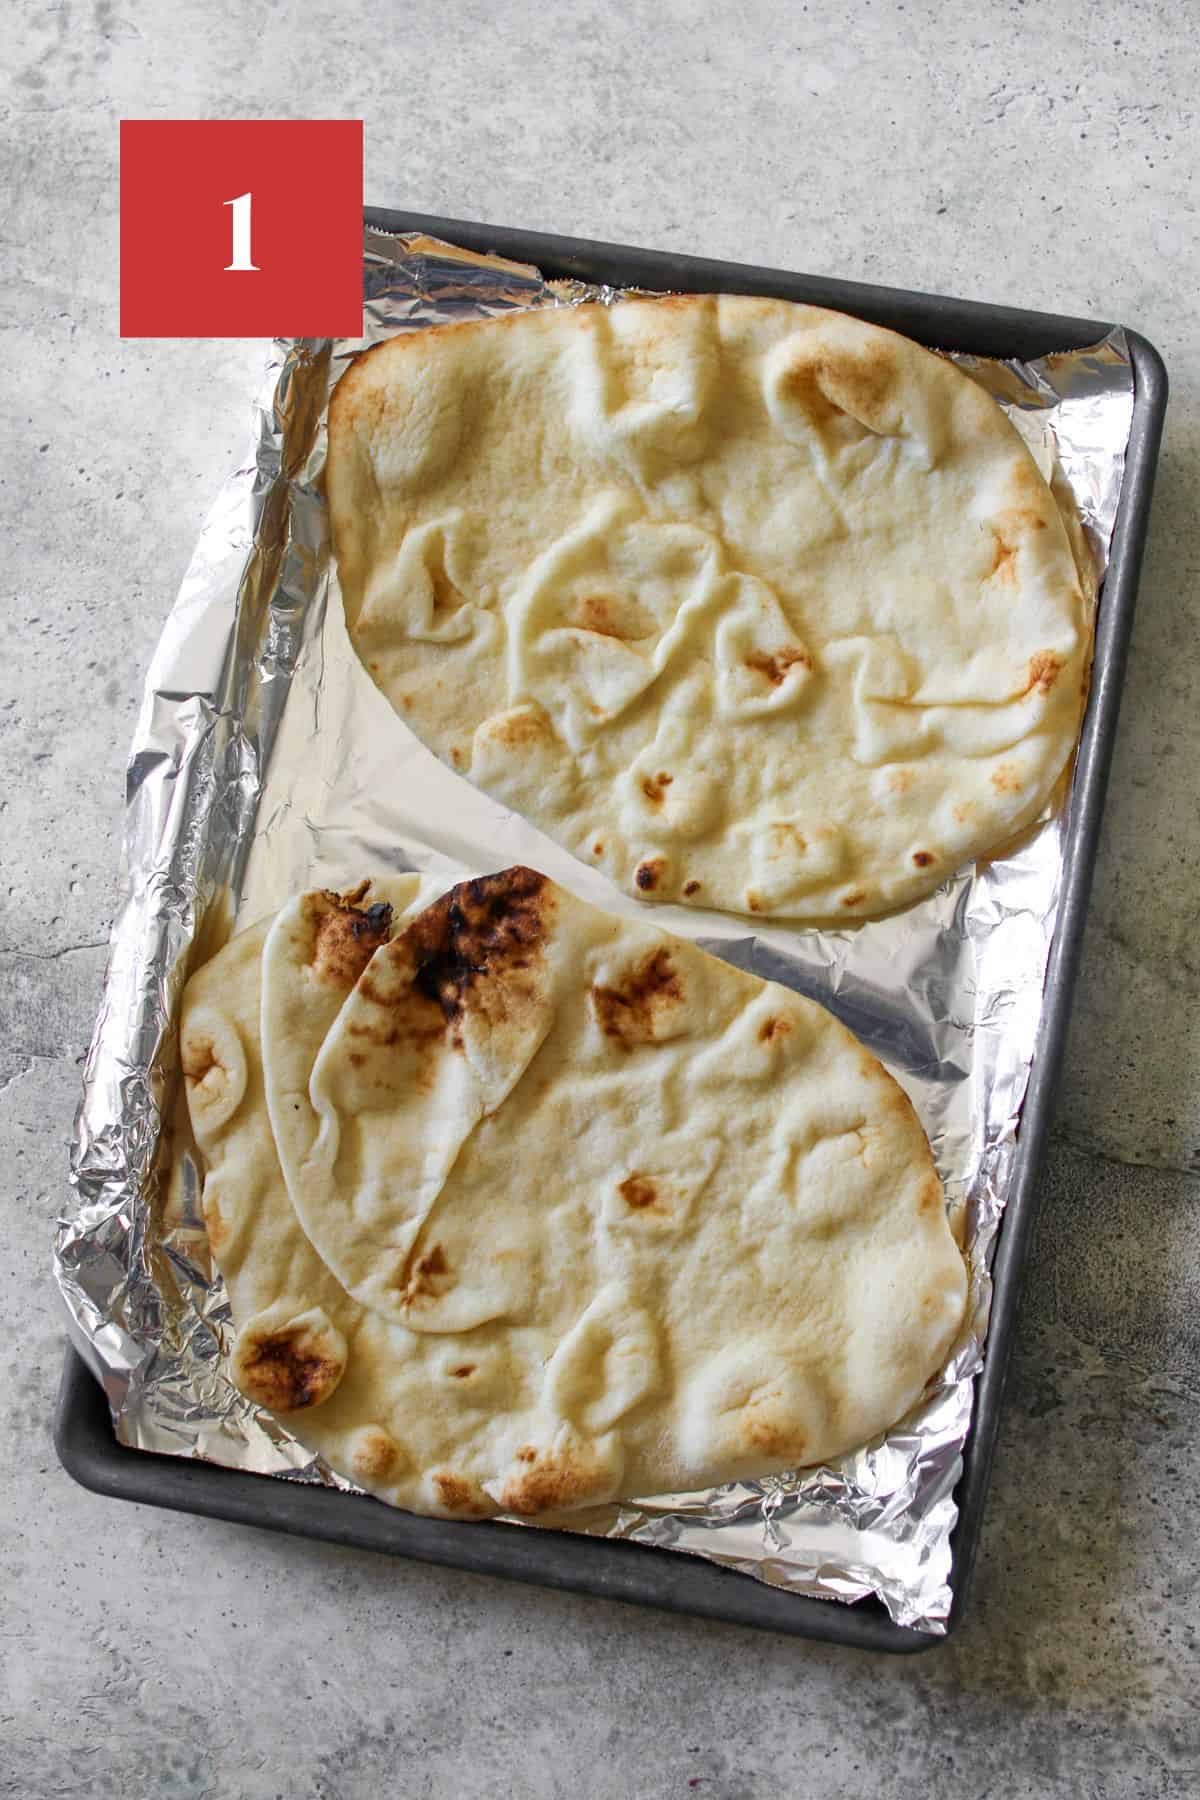 2 pieces of naan on a baking sheet lined with aluminum foil on a cement background. In the upper left corner is a dark red square with a white '1' in the center.